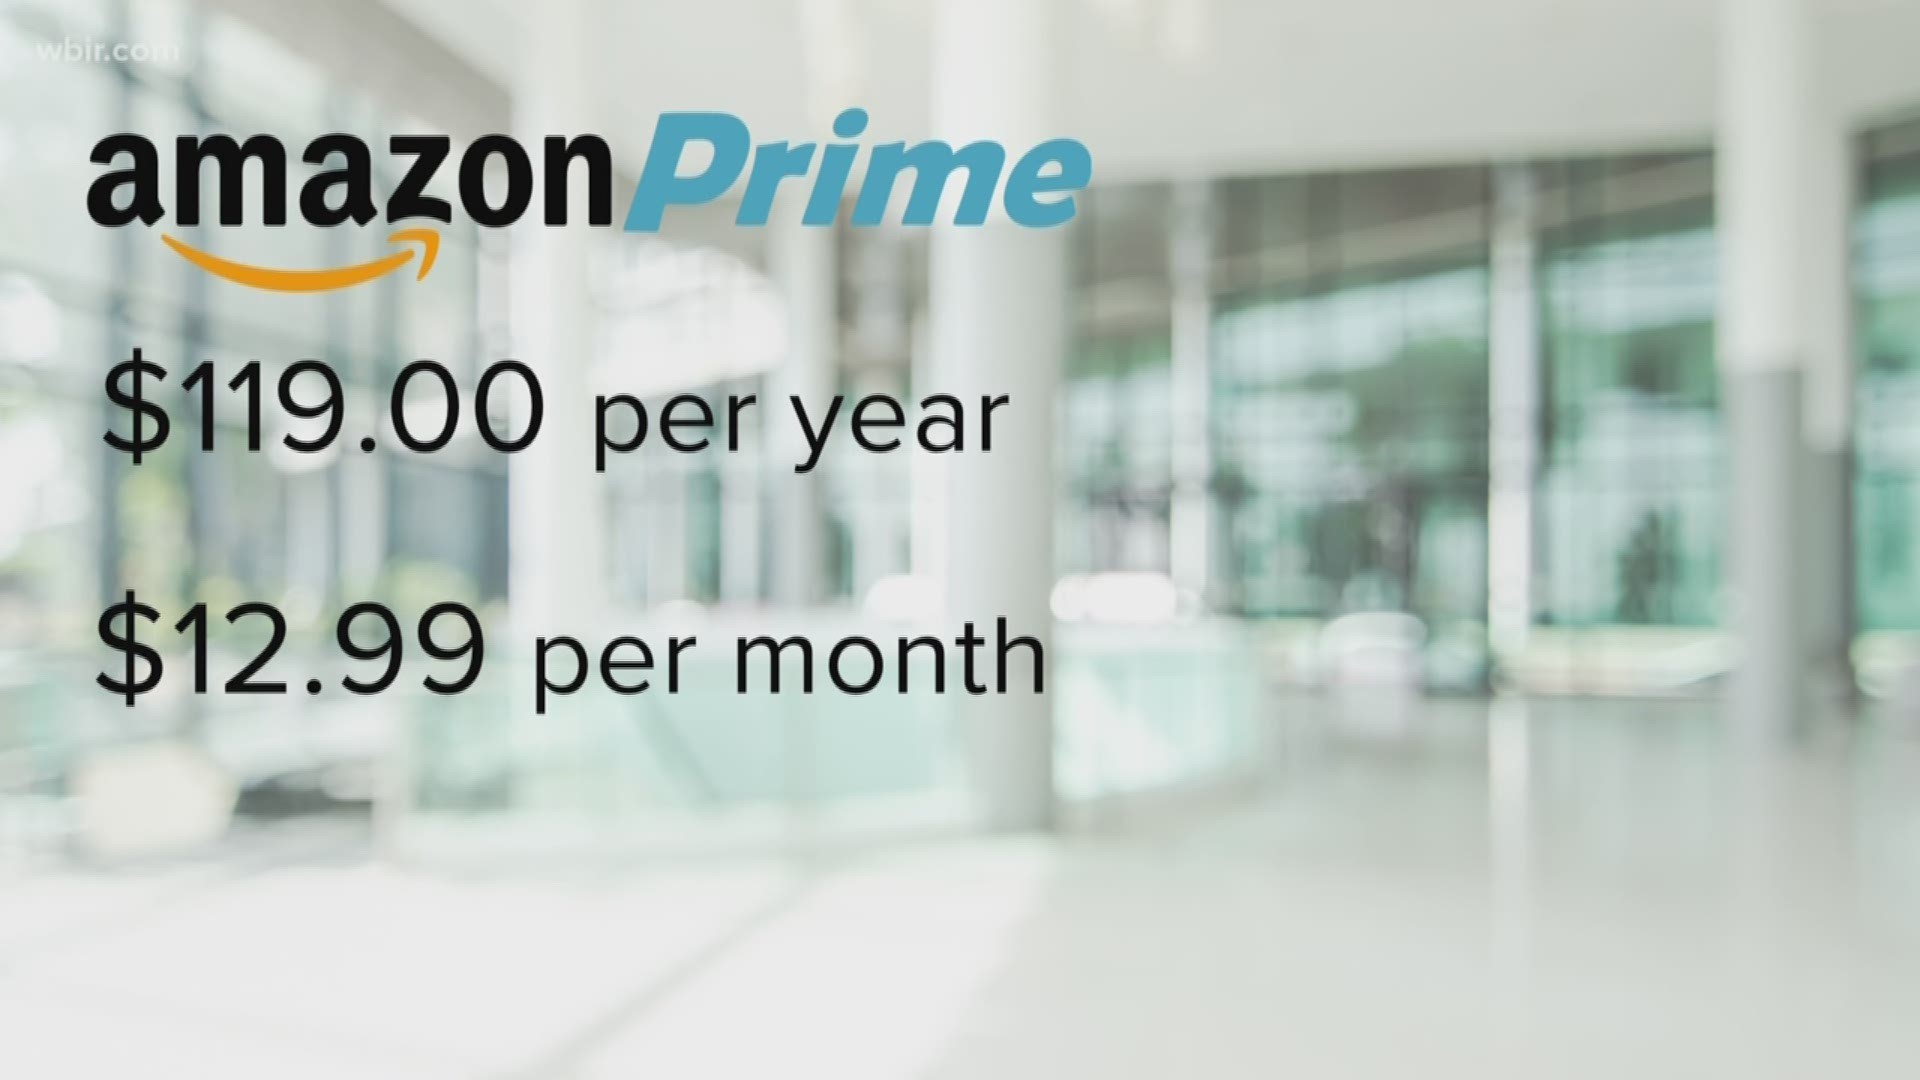 Amazon will have deals on everything from electronics, to health and beauty products, to toys and games for the kids. But you can only shop the sale if you're an Amazon Prime member. So is it worth it? Let's break down the numbers.